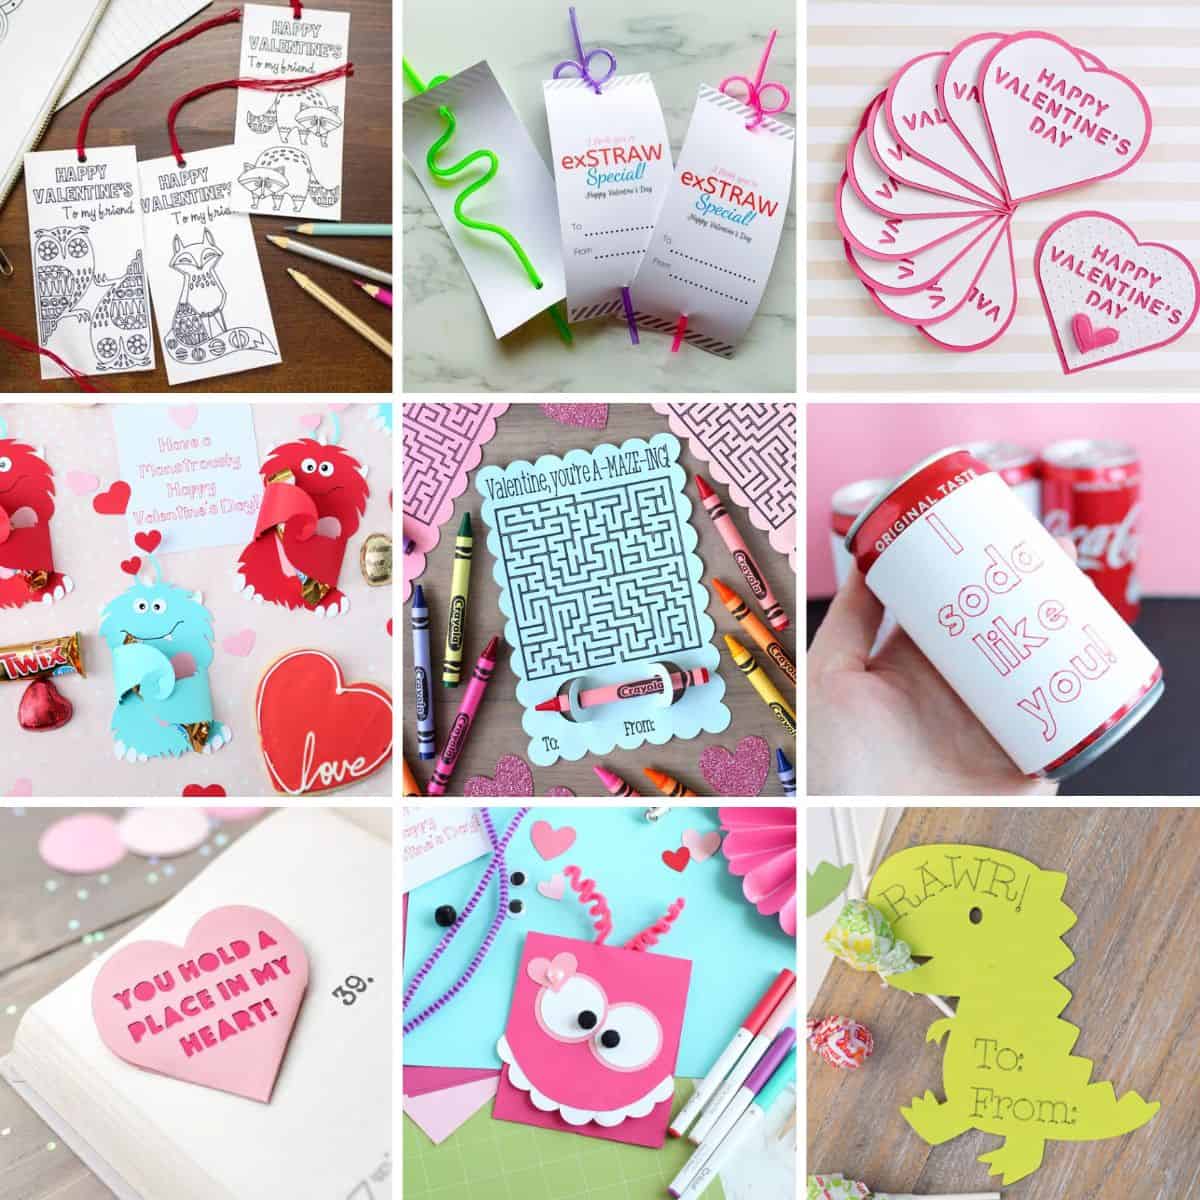 23 Classroom Valentine Cards You Can Make with Cricut - The Crafty